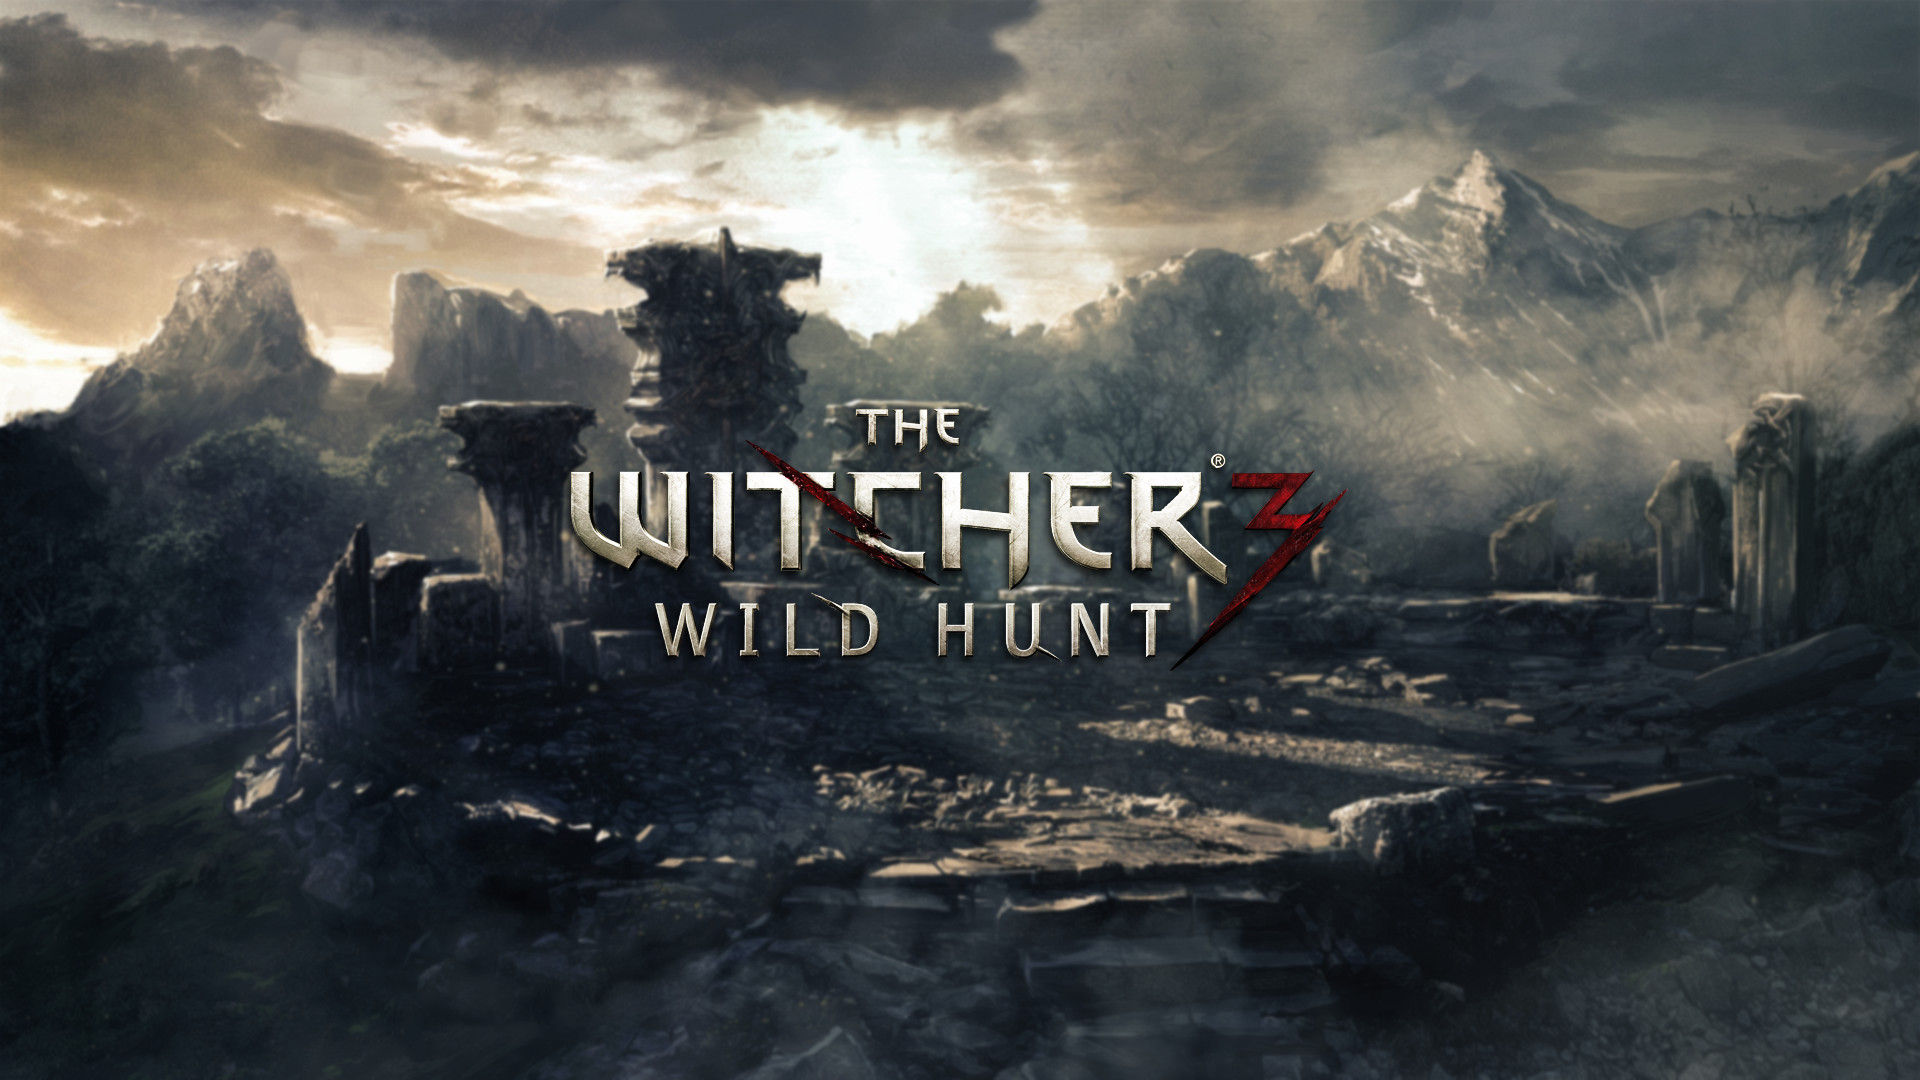 1920x1080 ... The Witcher 3 Wild Hunt HD Backgrounds for PC ...